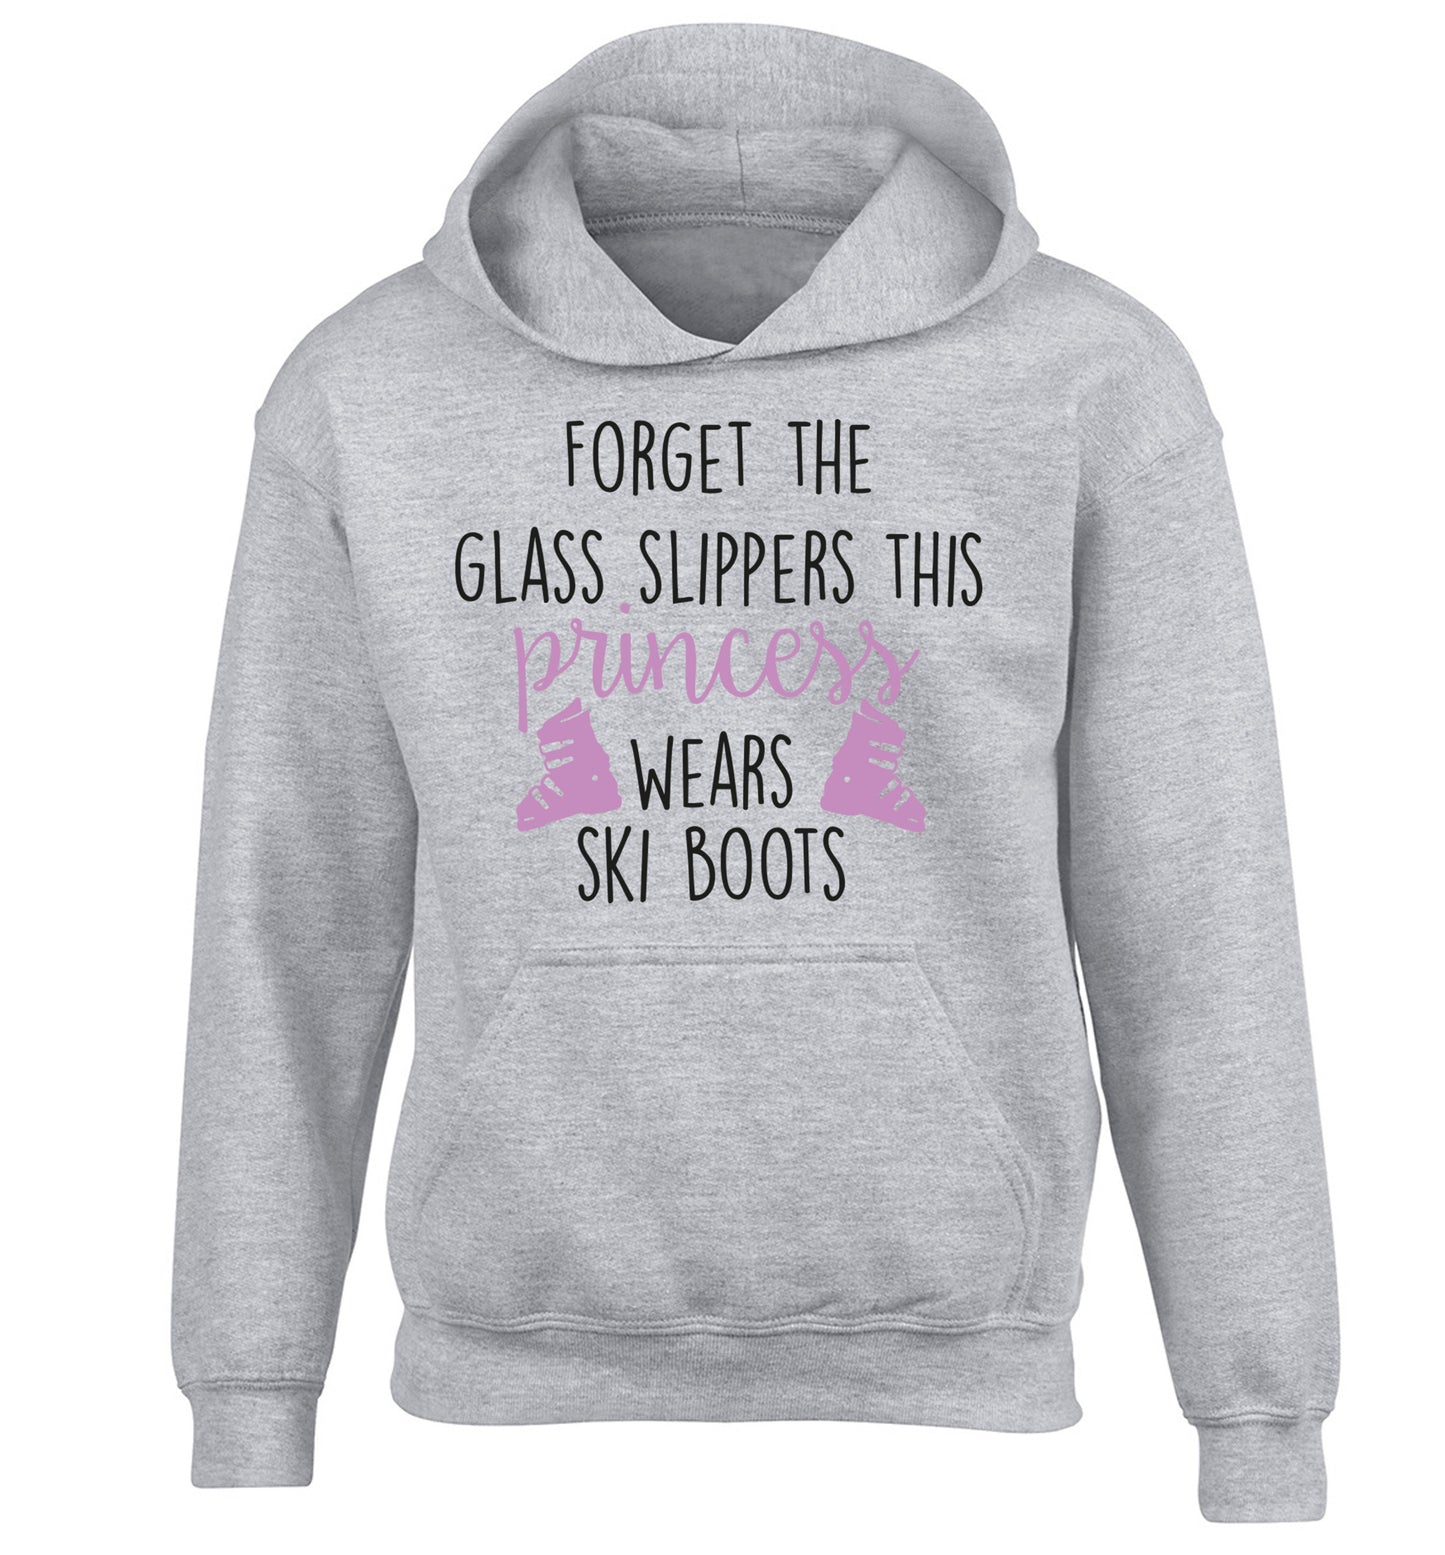 Forget the glass slippers this princess wears ski boots children's grey hoodie 12-14 Years